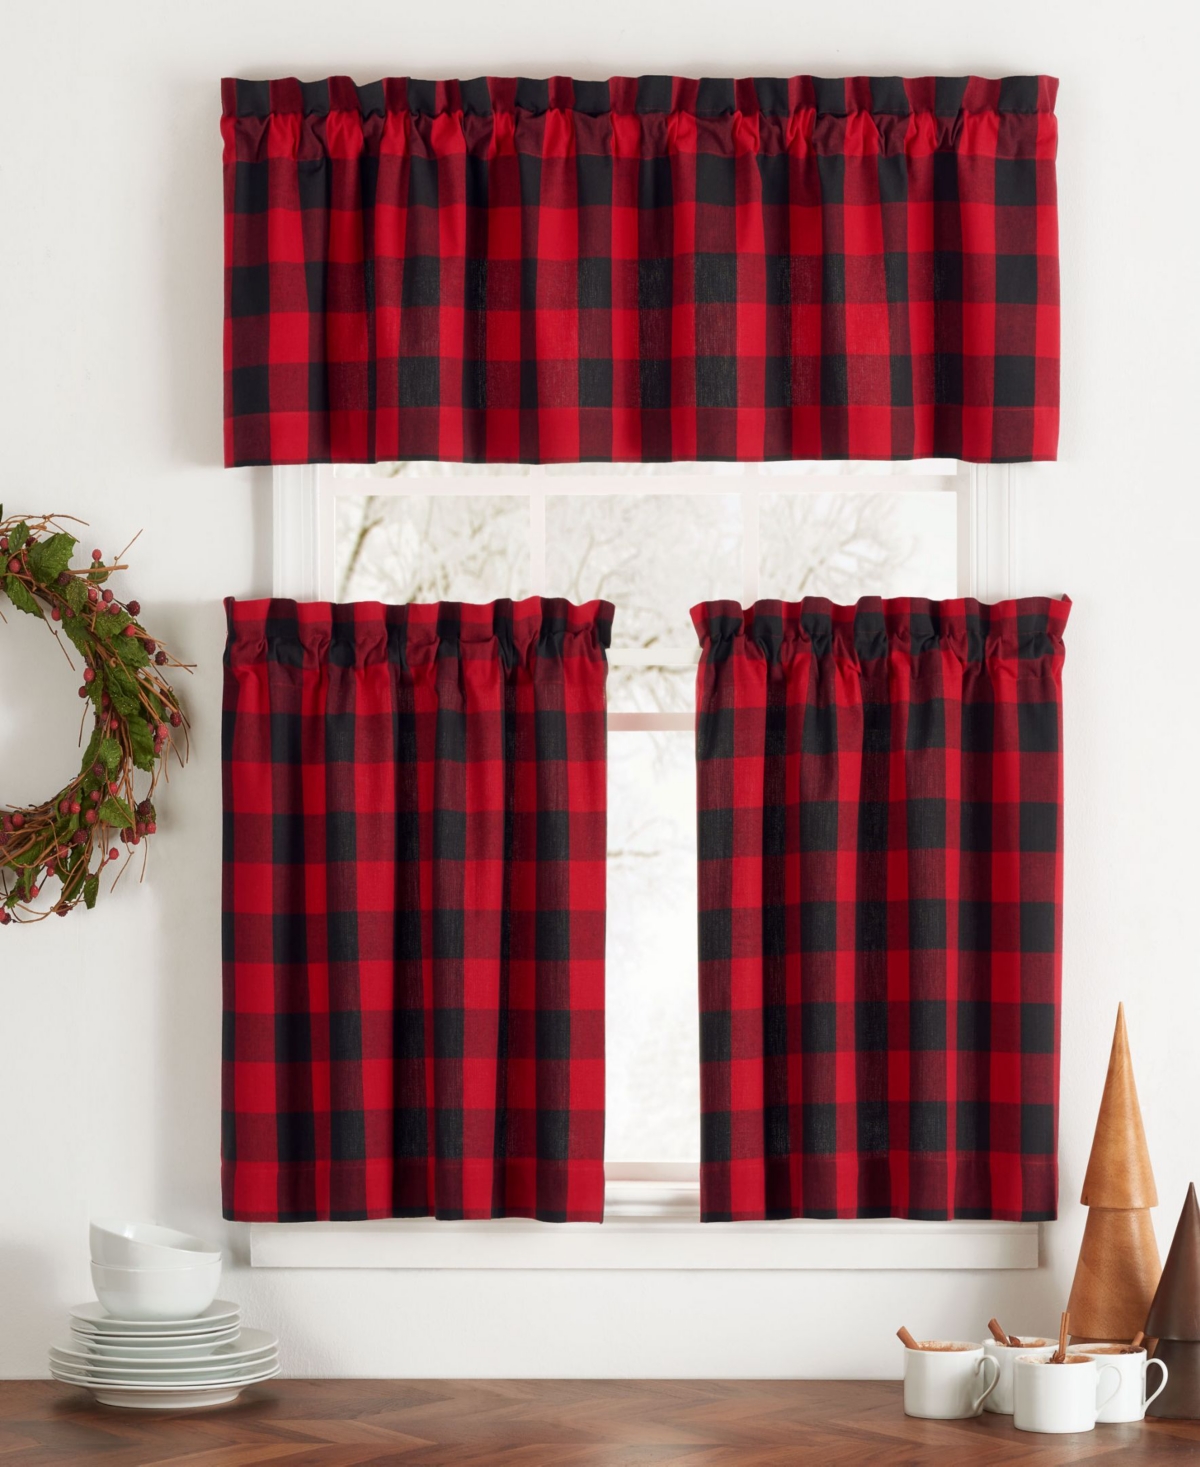 Elrene Farmhouse Living Holiday Buffalo Check Window Curtain Tier Set, 2 Piece, 30" X 36" In Red,black